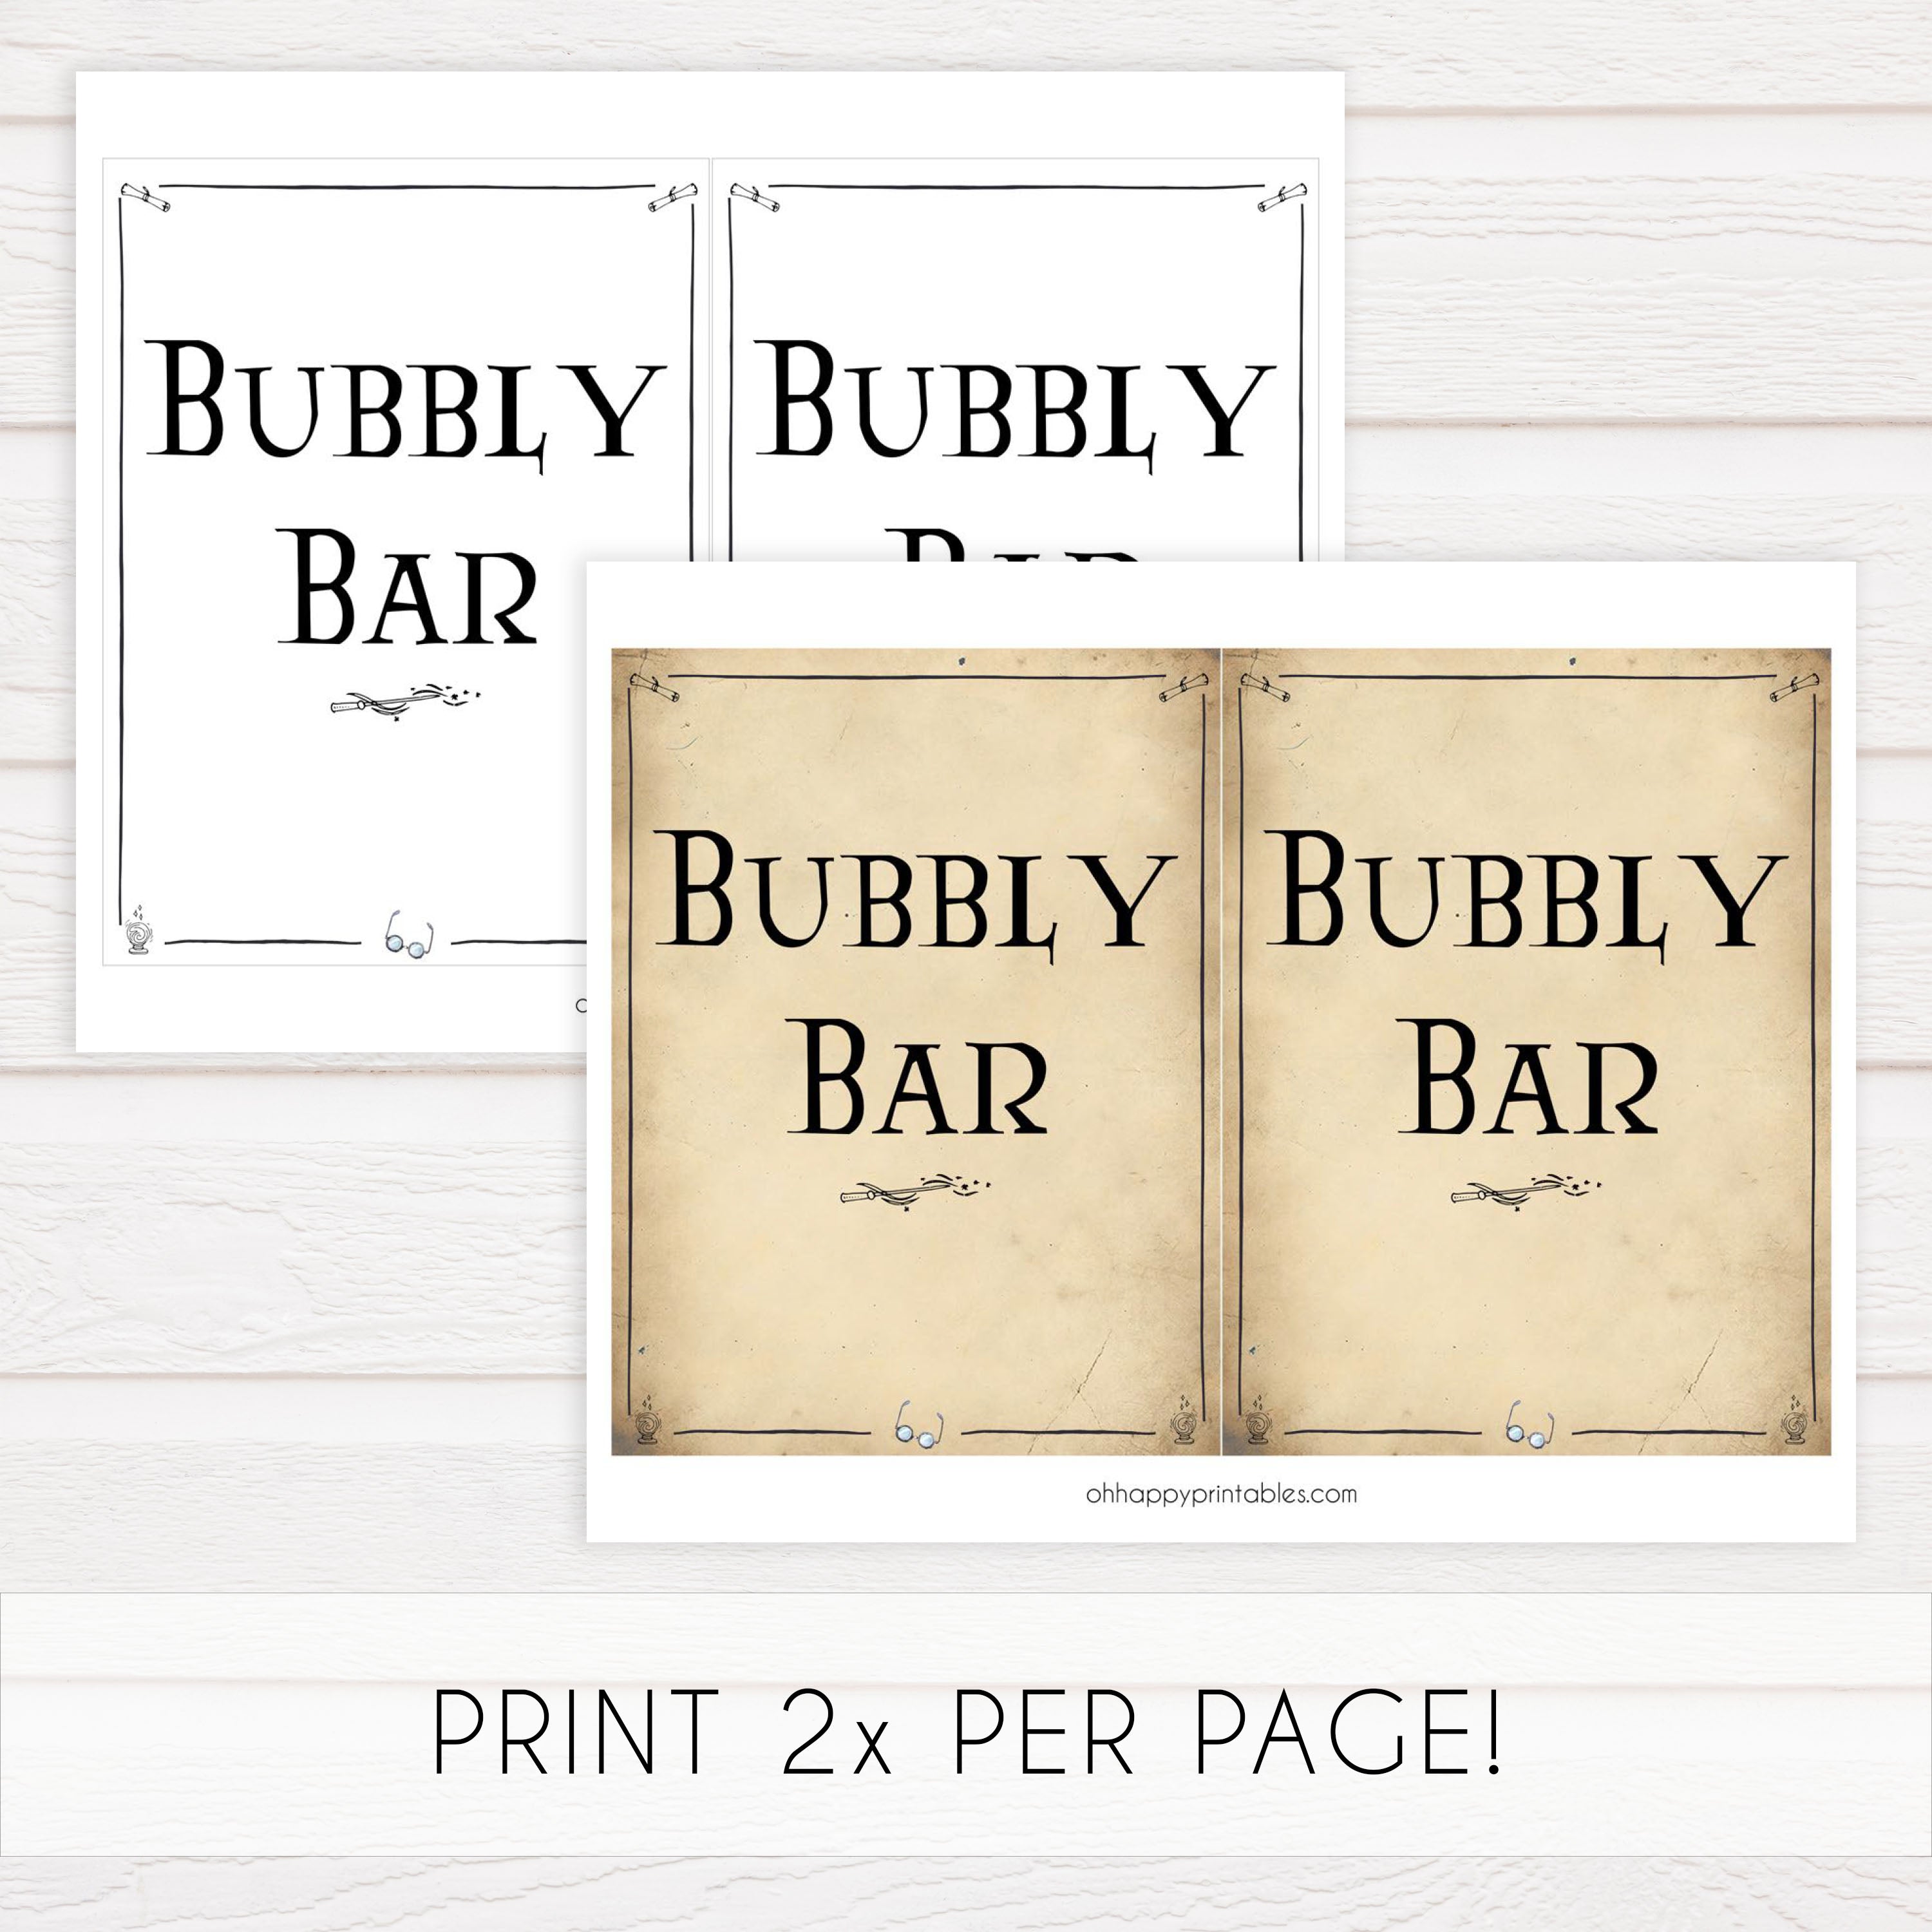 bubbly bar sign, Printable bridal shower signs, Harry Potter bridal shower decor, Harry Potter bridal shower decor ideas, fun bridal shower decor, bridal shower game ideas, Harry Potter bridal shower ideas